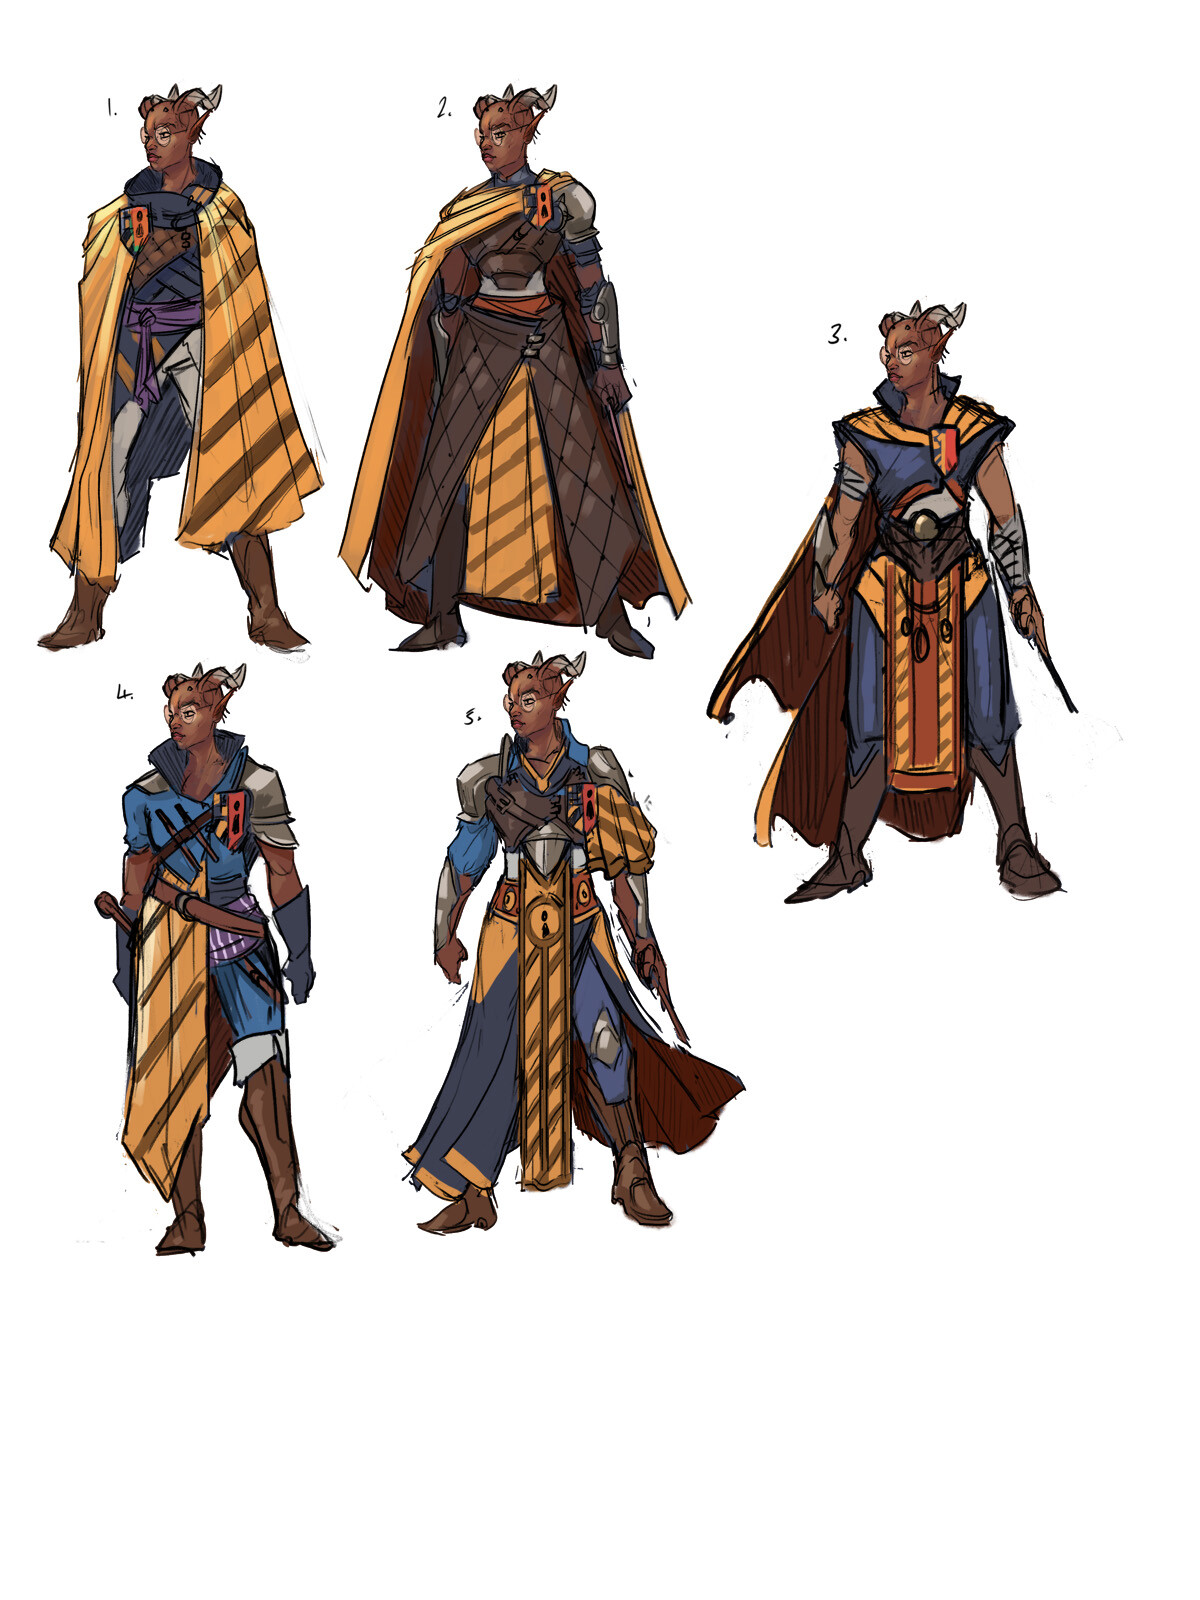 Initial designs for the warmages. It was established early on that warmages belonging to one of the 4 main houses would wear their houses colours, mixed in with their own personal heraldic designs.